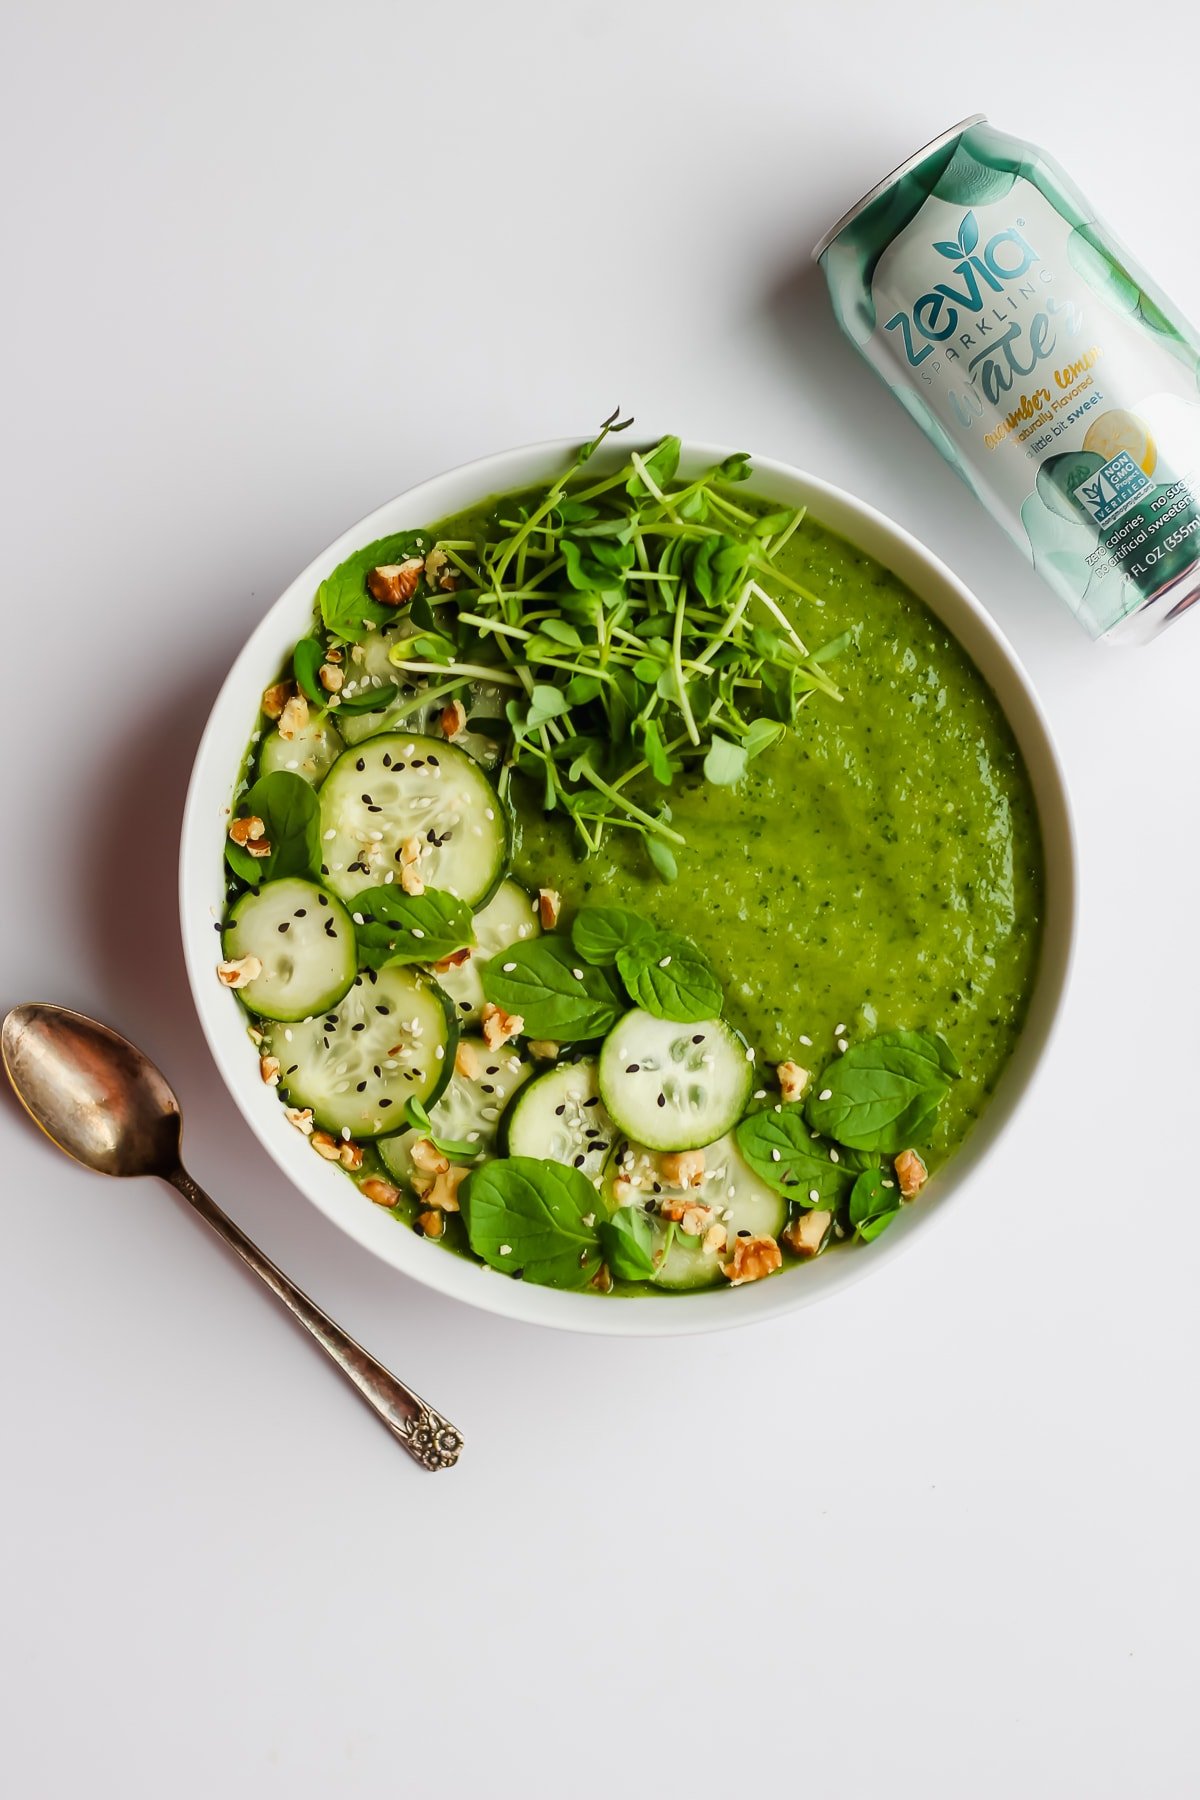 A healthy green smoothie bowl with a spoon next to it.